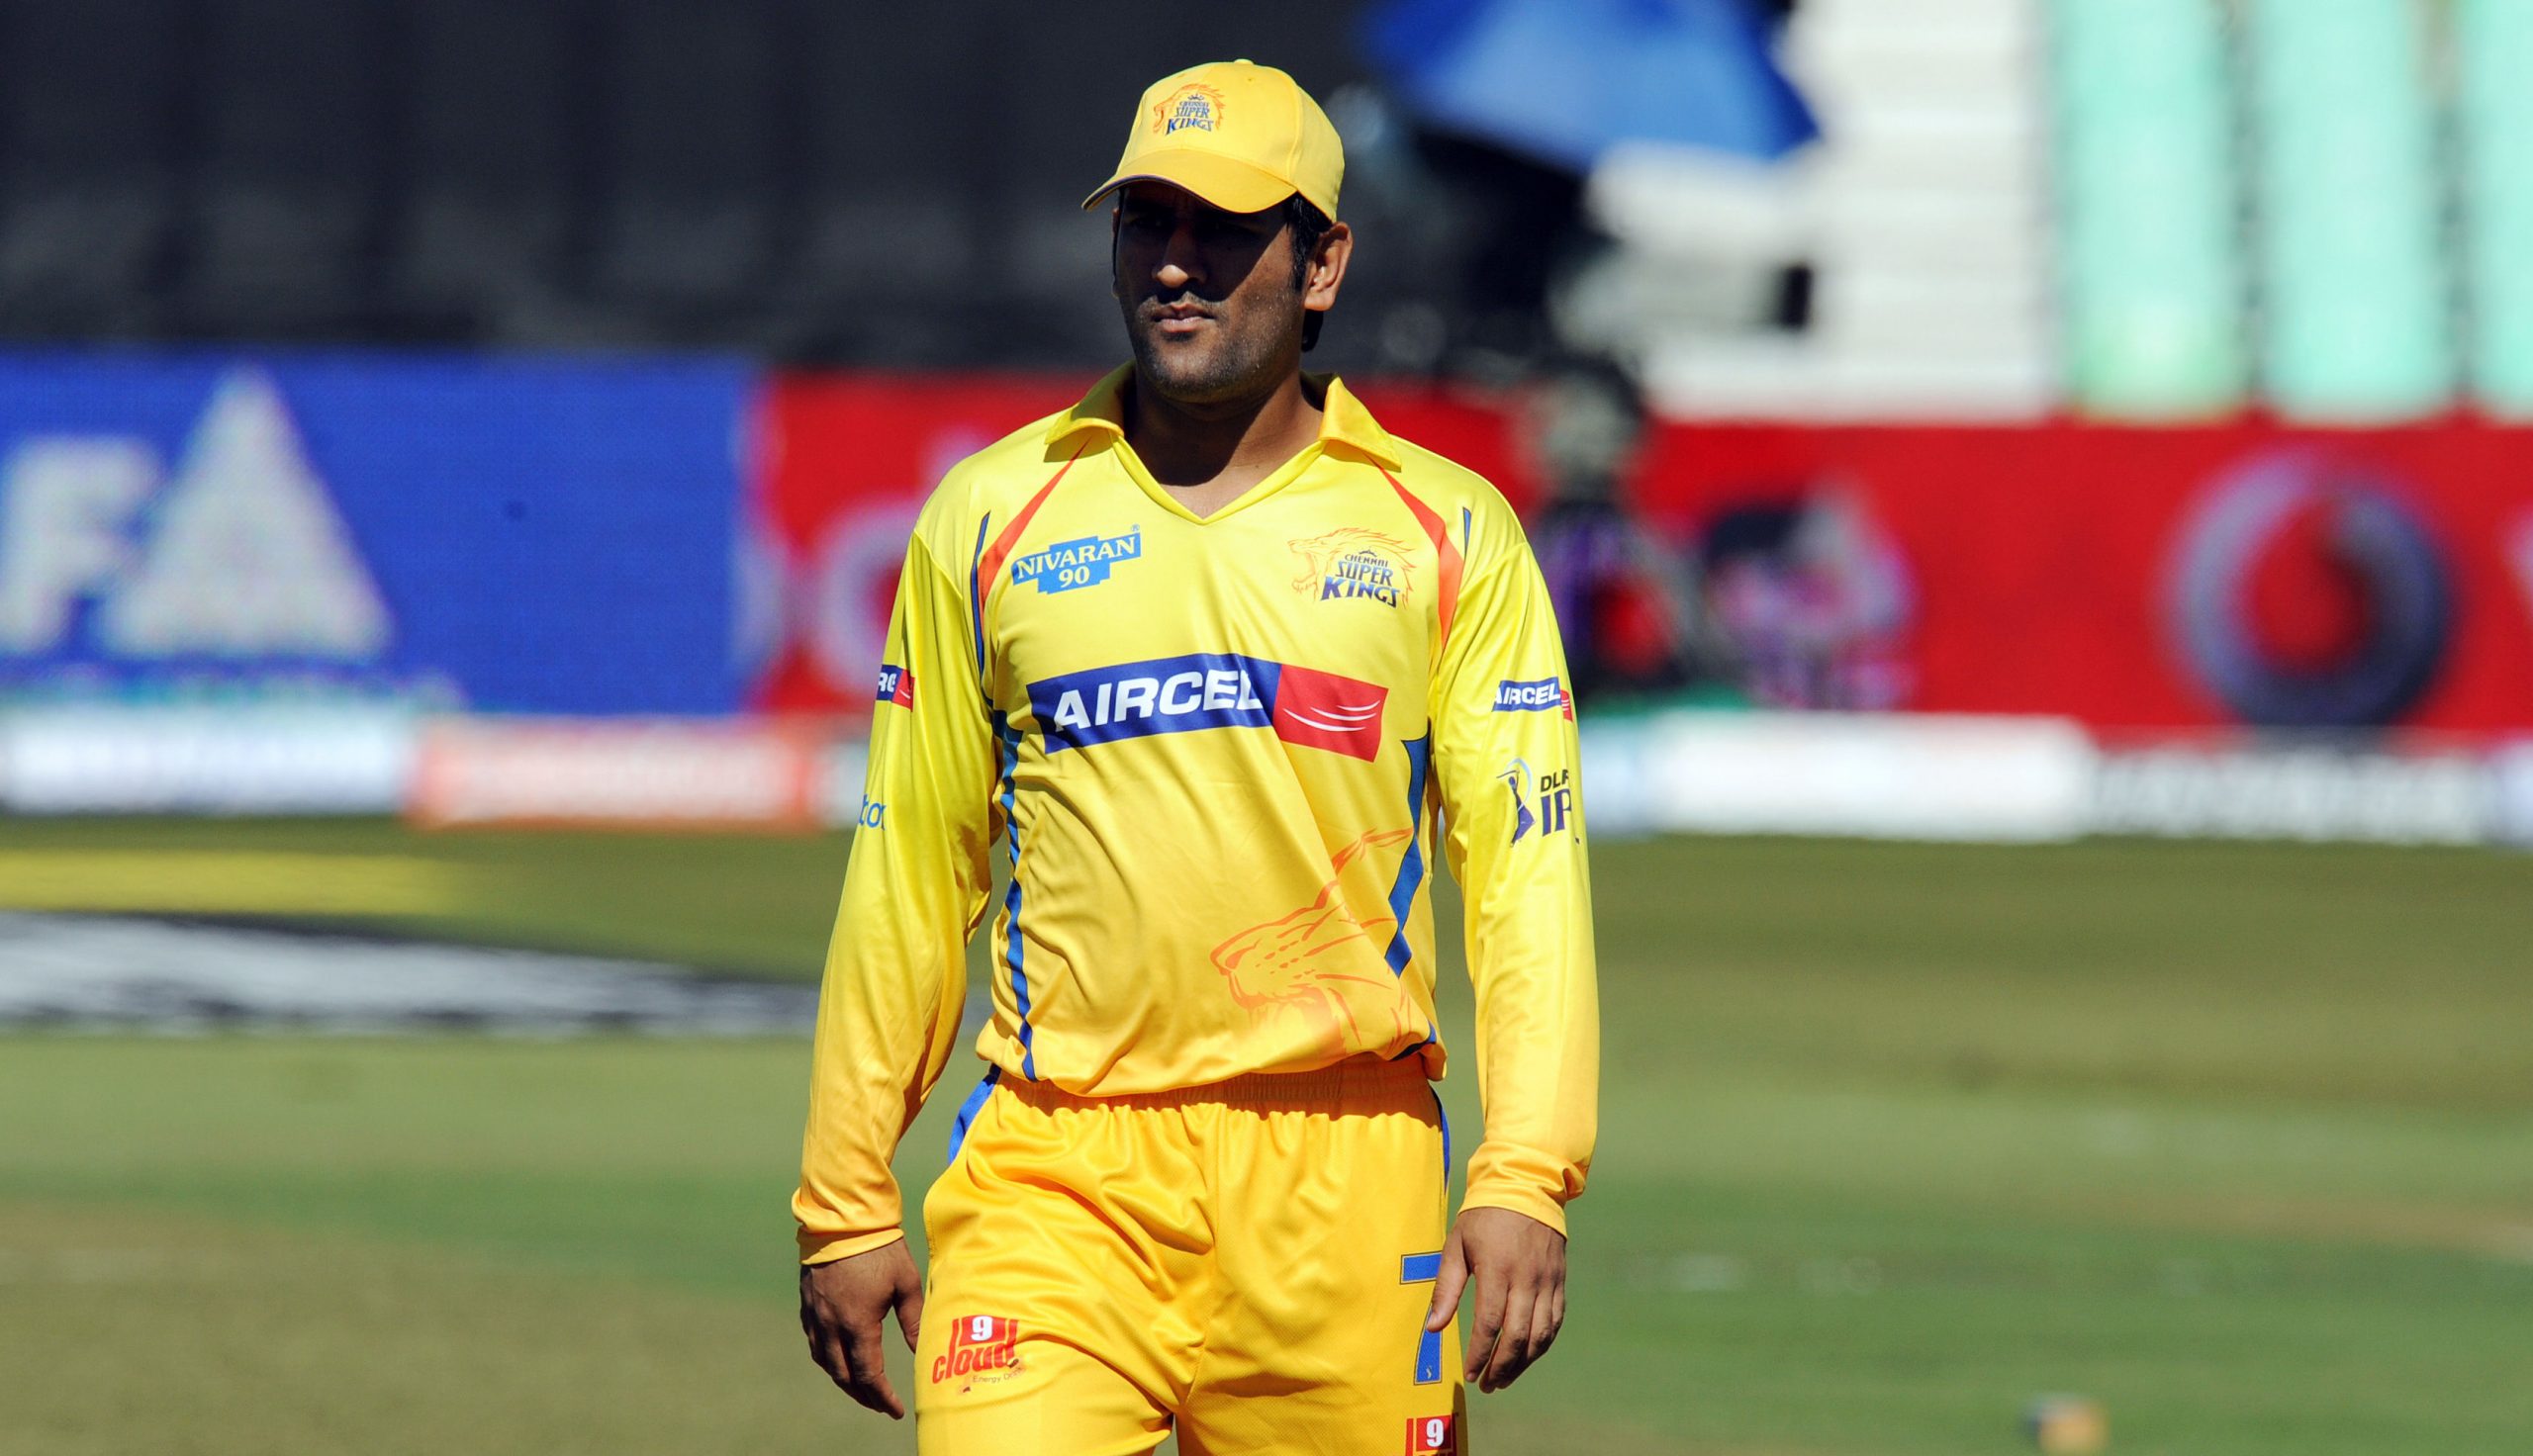 ‘We don’t worry’: Chennai Super Kings expects Dhoni to play IPL even in 2022